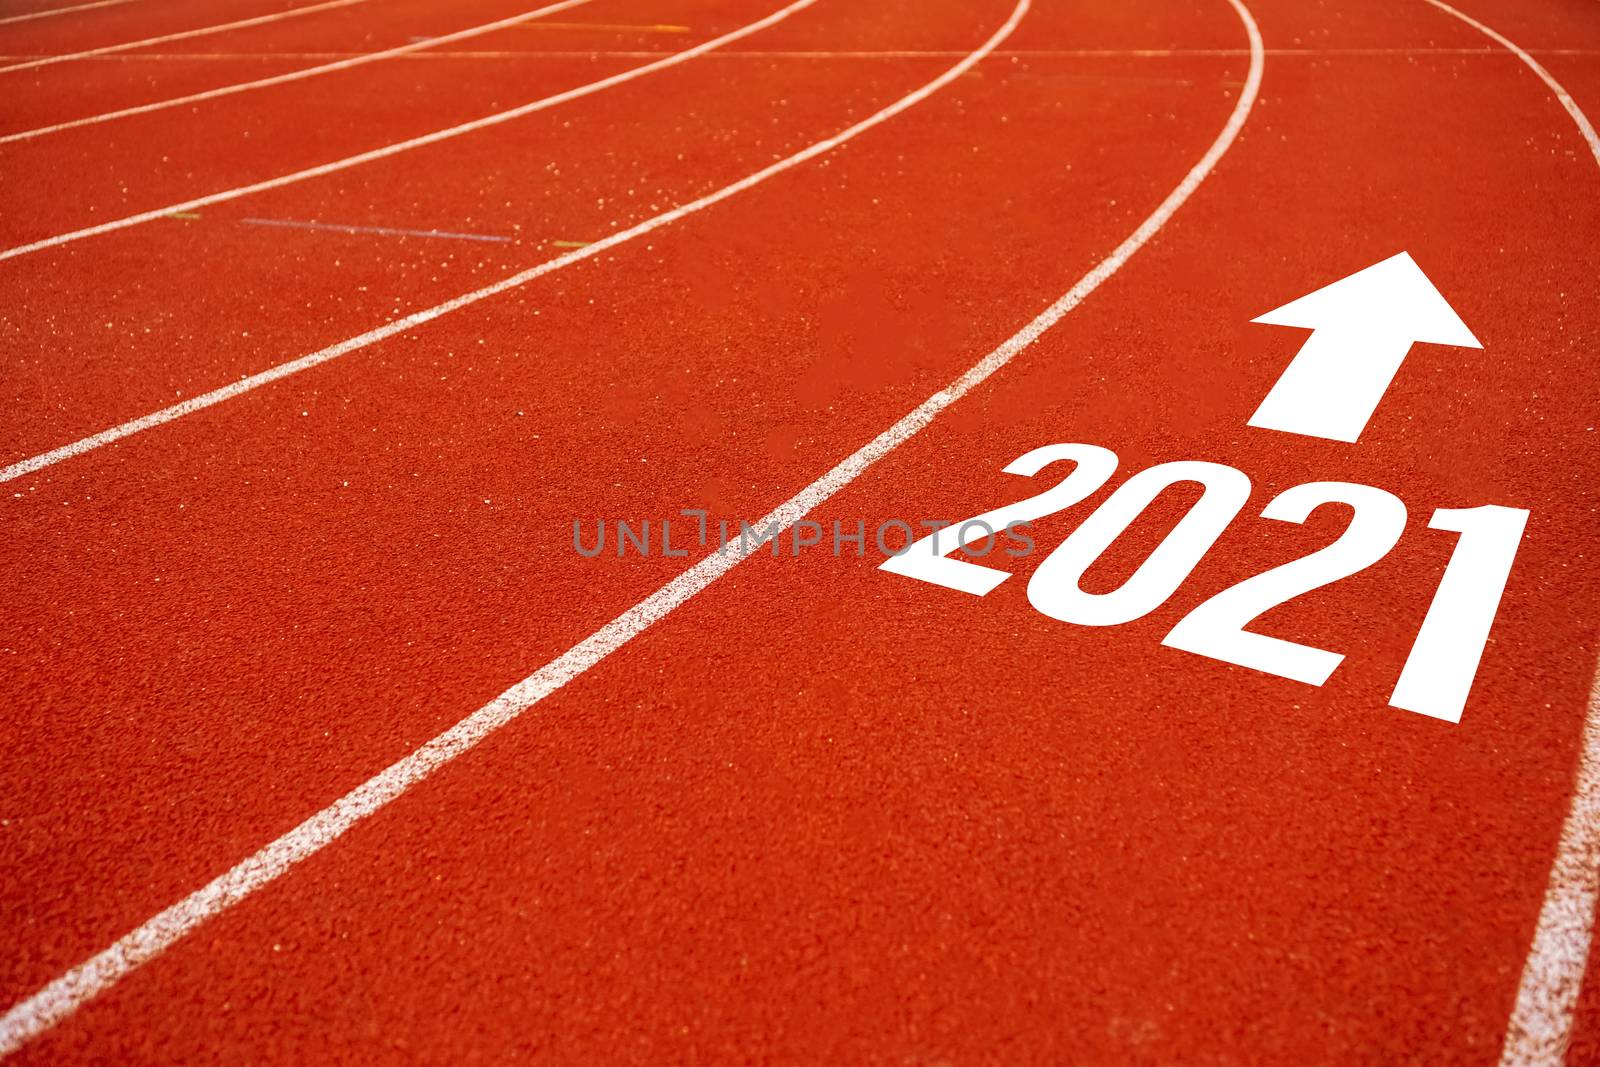 Start line to 2021 on running court represents the beginning of a journey to the destination in business planning, strategy and challenge or career path, opportunity concept.